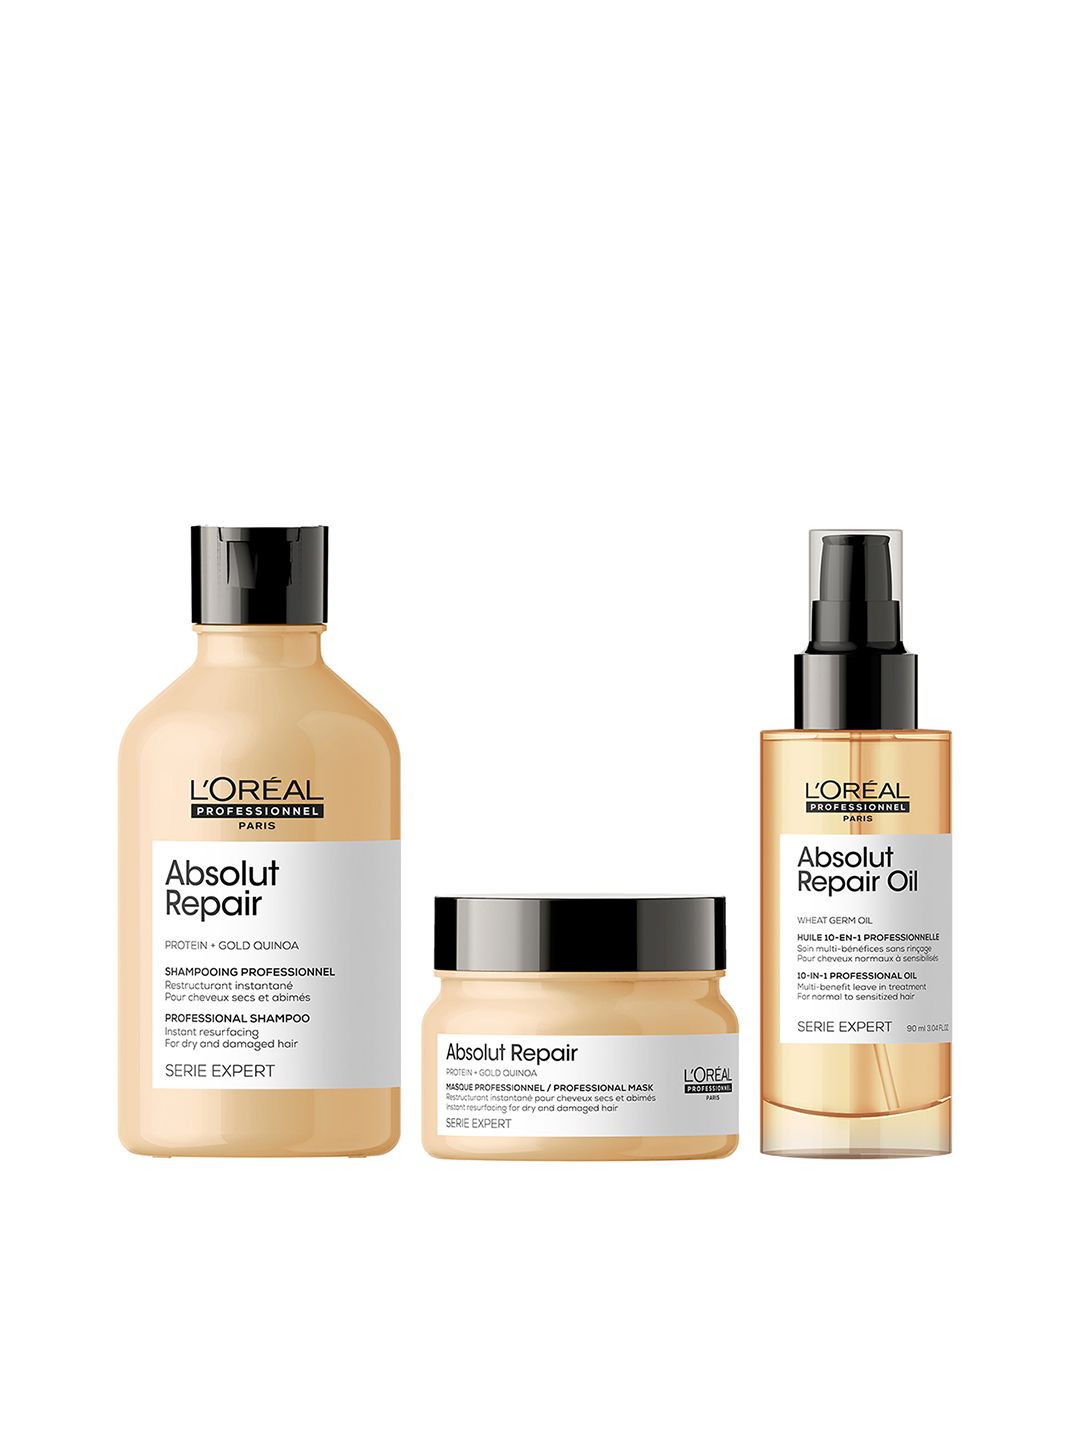 LOreal Professionnel Set of Absolut Repair Hair Mask - Shampoo - Oil Price in India